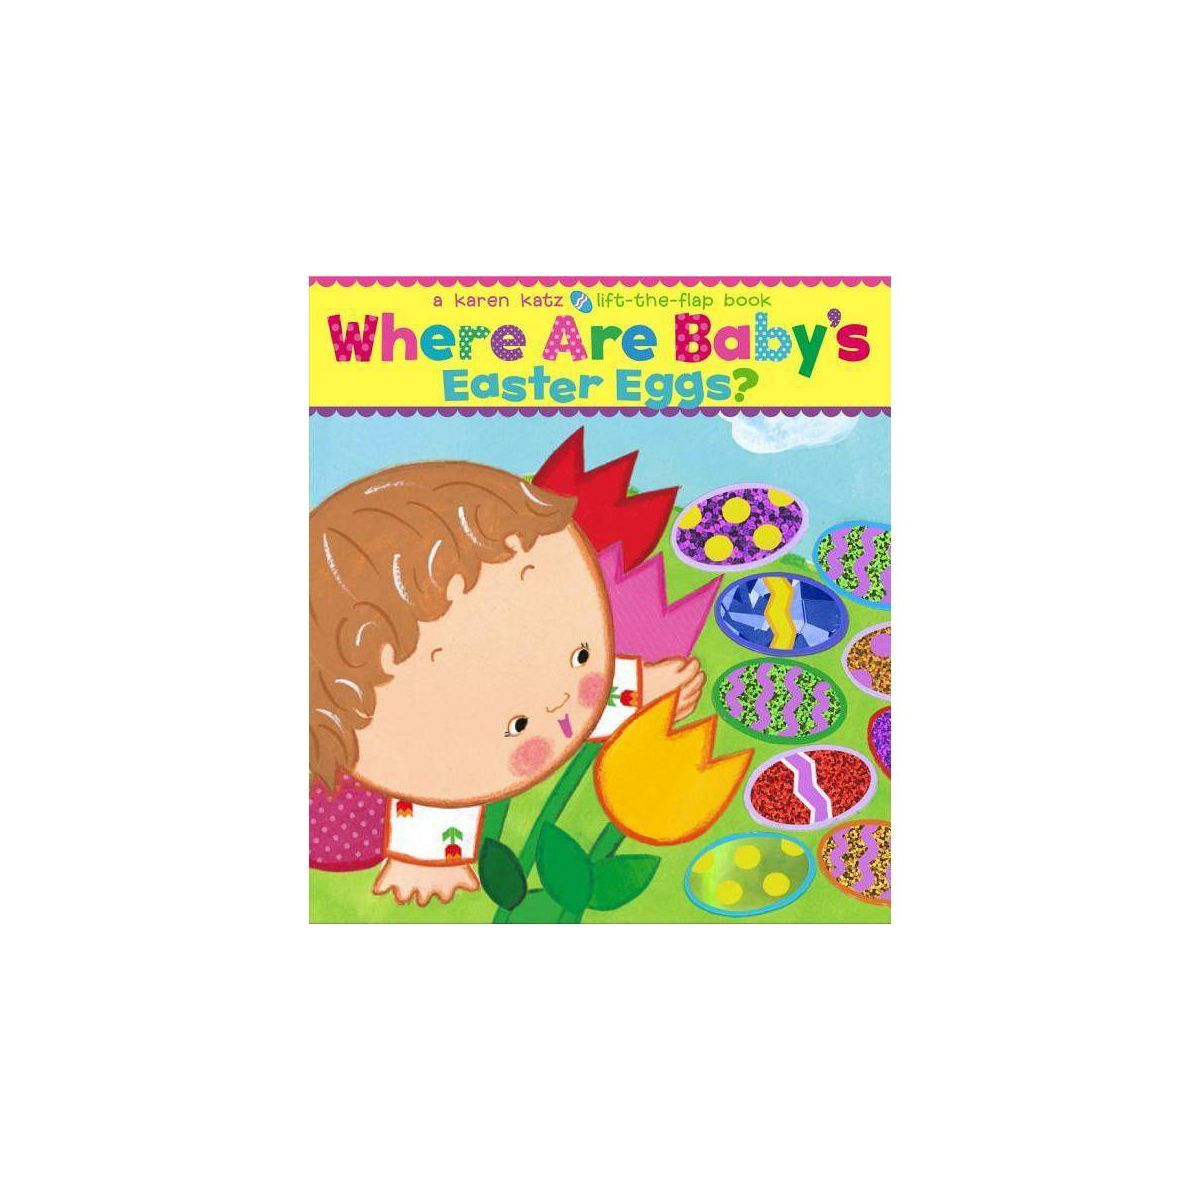 Where Are Baby's Easter Eggs? (Lift-the-Flap Book) (Board Book) by Karen Katz | Target